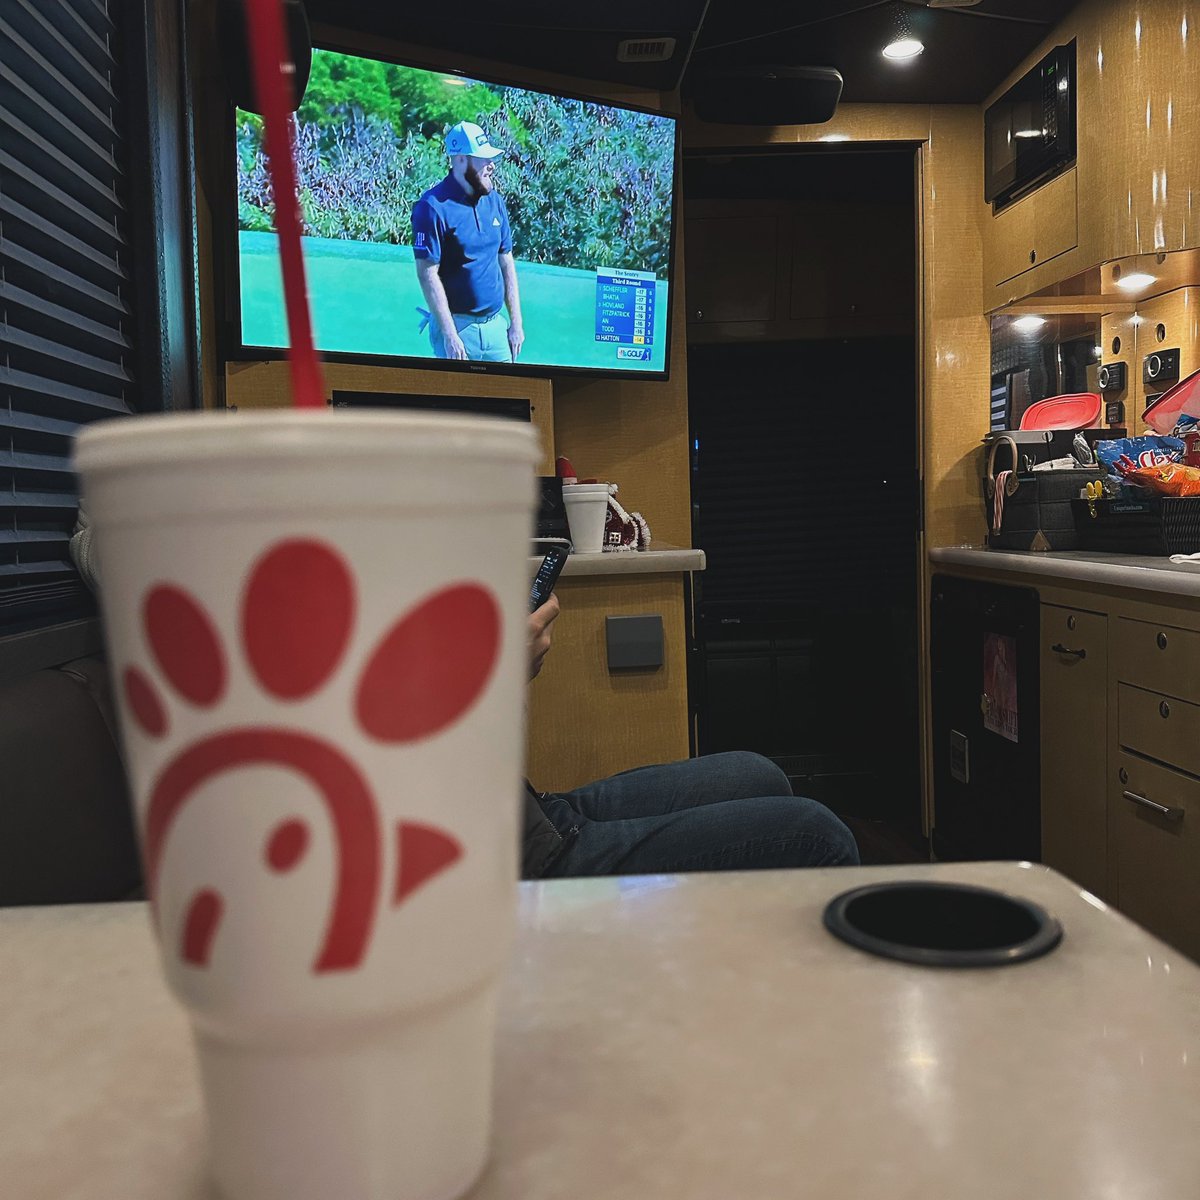 We are set up and have turned in for the night. So thankful for this bus! And yes, the bus tv mainly stays on @golfchannel #bandofgolfers #jasonlovinsband